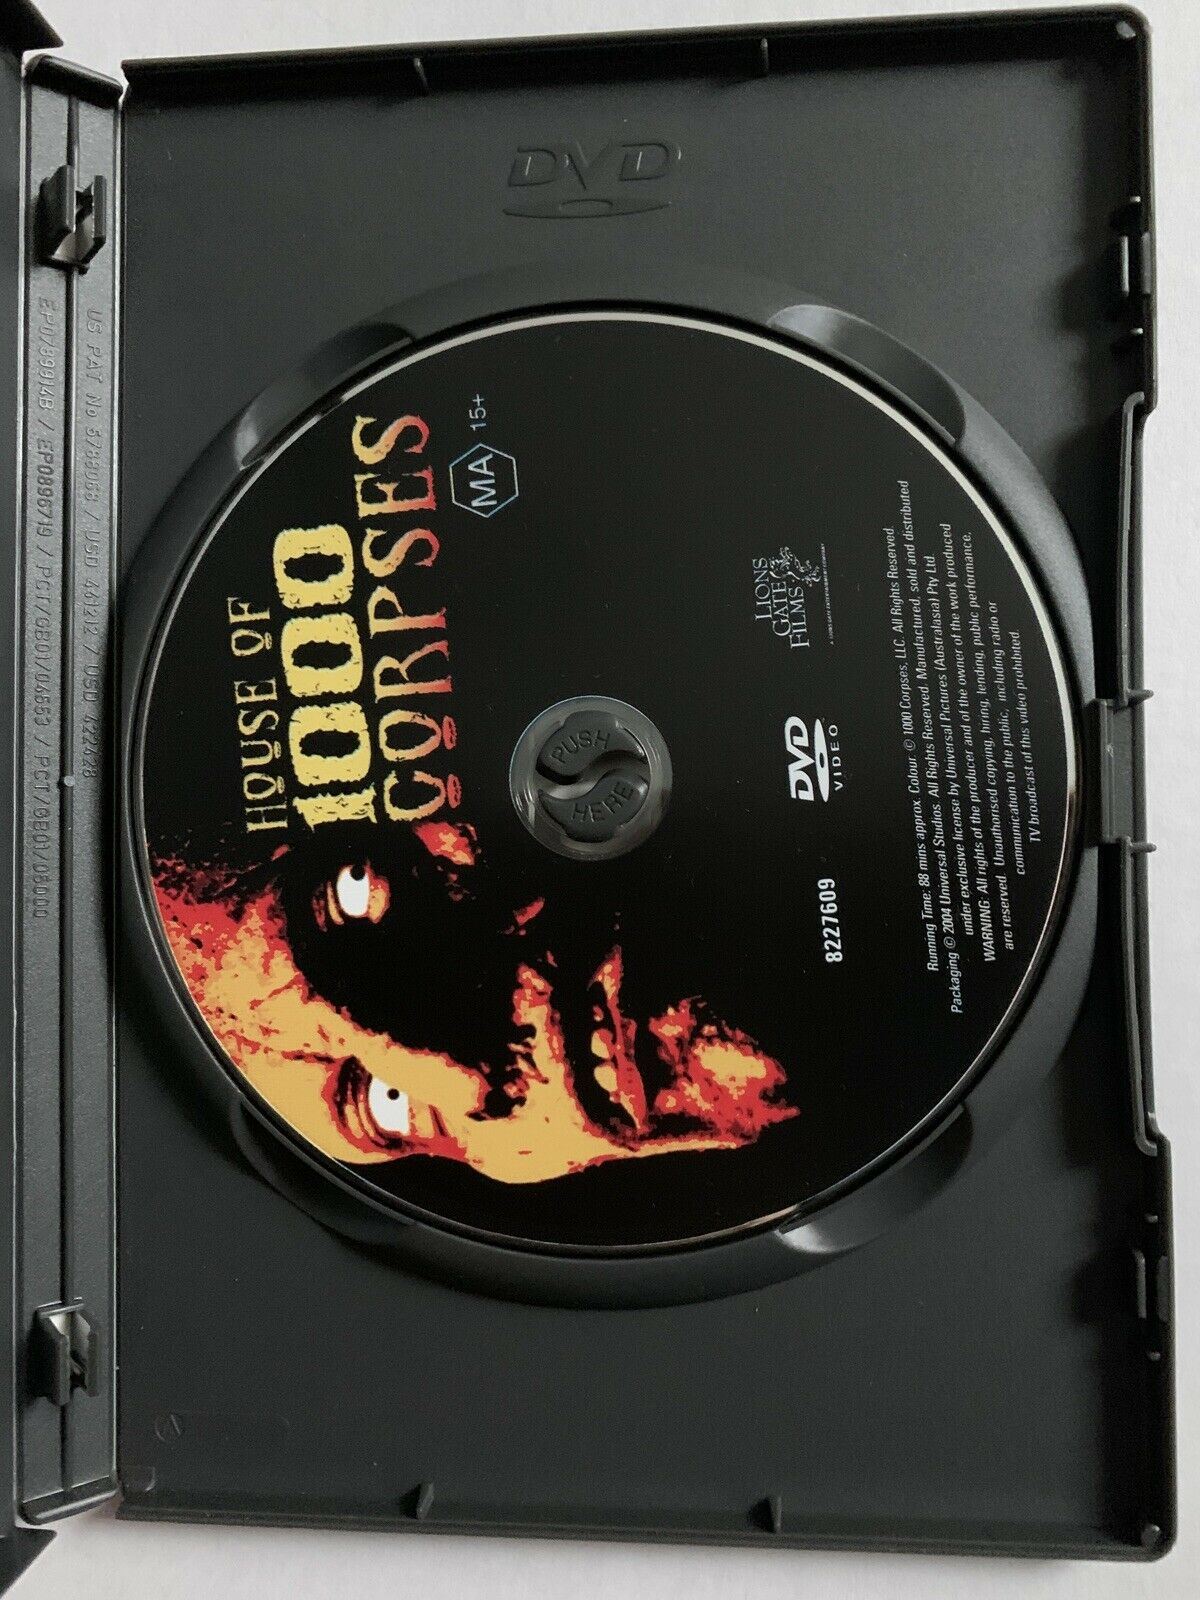 House Of 1,000 Corpses (DVD, 2004) Directed By Rob Zombie. Region 4